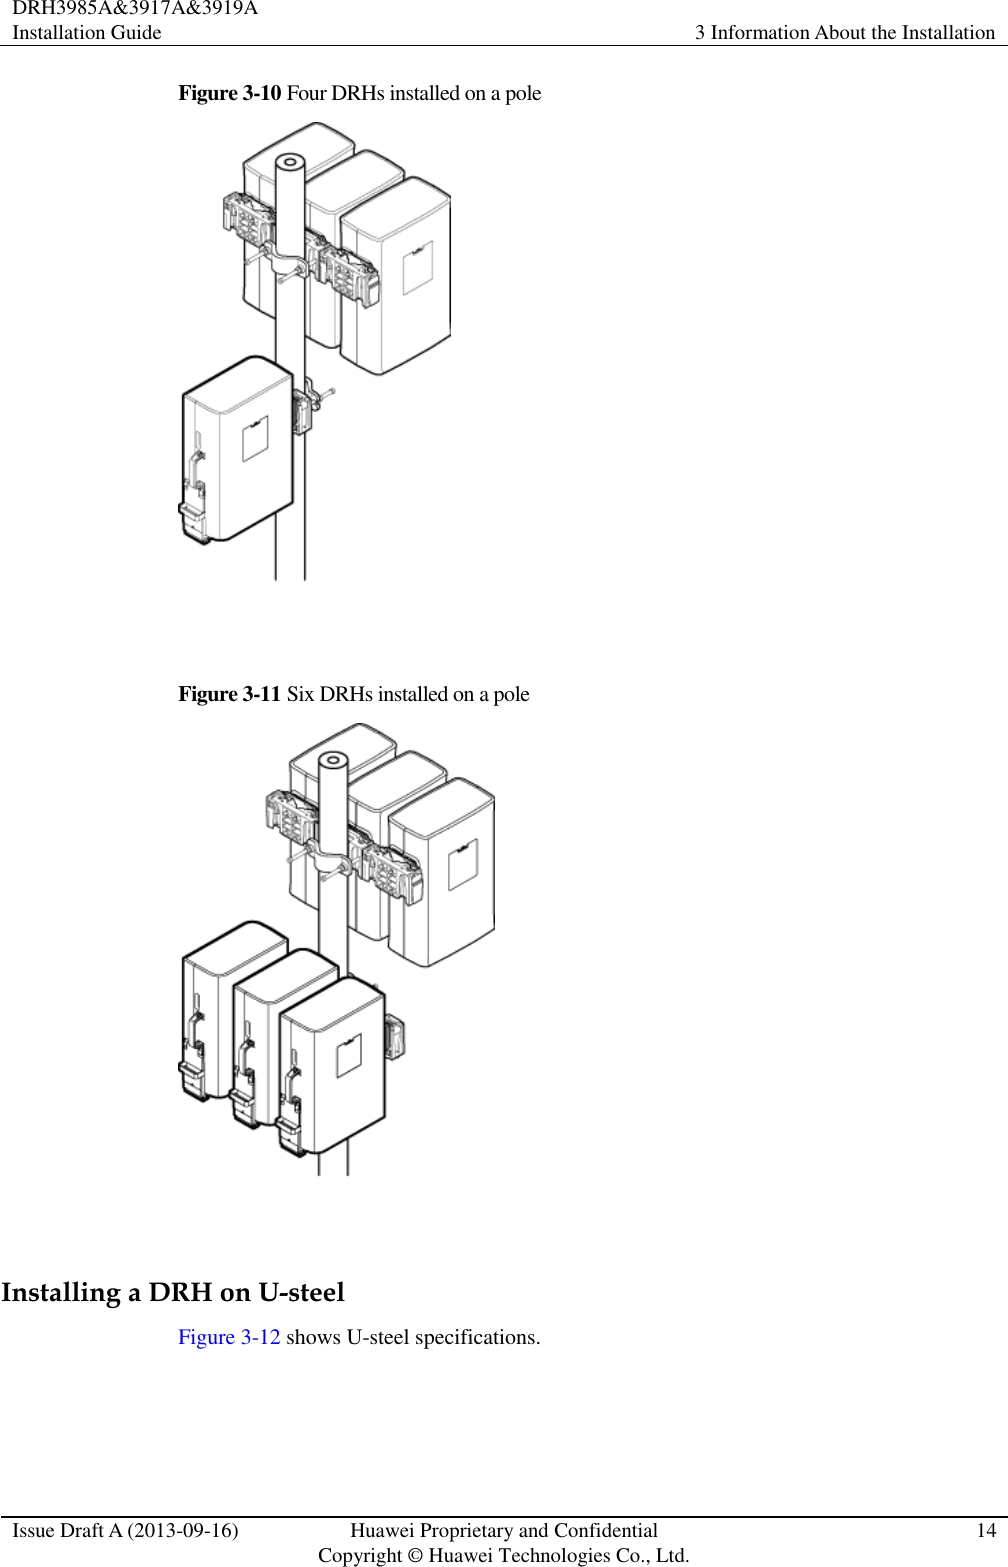 DRH3985A&amp;3917A&amp;3919A Installation Guide 3 Information About the Installation  Issue Draft A (2013-09-16) Huawei Proprietary and Confidential                                     Copyright © Huawei Technologies Co., Ltd. 14  Figure 3-10 Four DRHs installed on a pole   Figure 3-11 Six DRHs installed on a pole   Installing a DRH on U-steel Figure 3-12 shows U-steel specifications. 